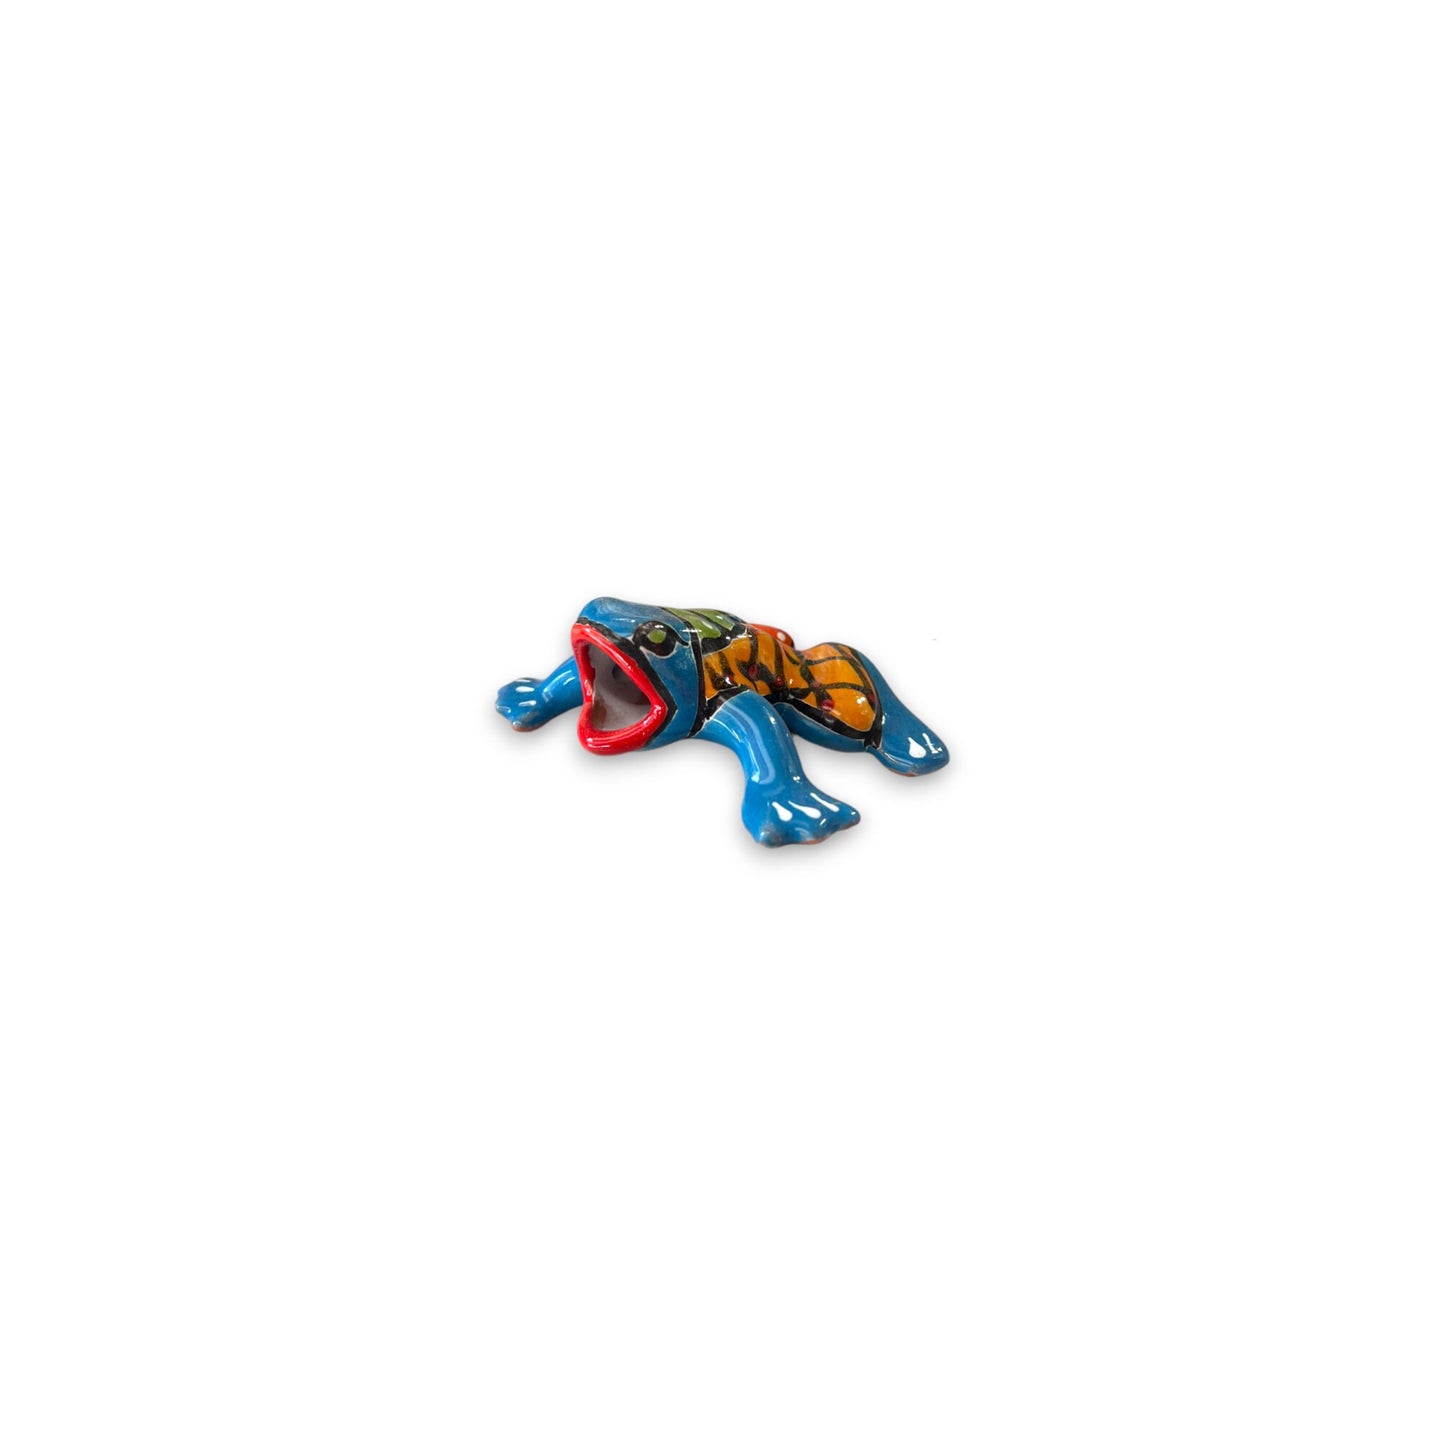 Colorful Handmade Talavera Frog Figurine | Mexican Hand-Painted Decor (Small Size)